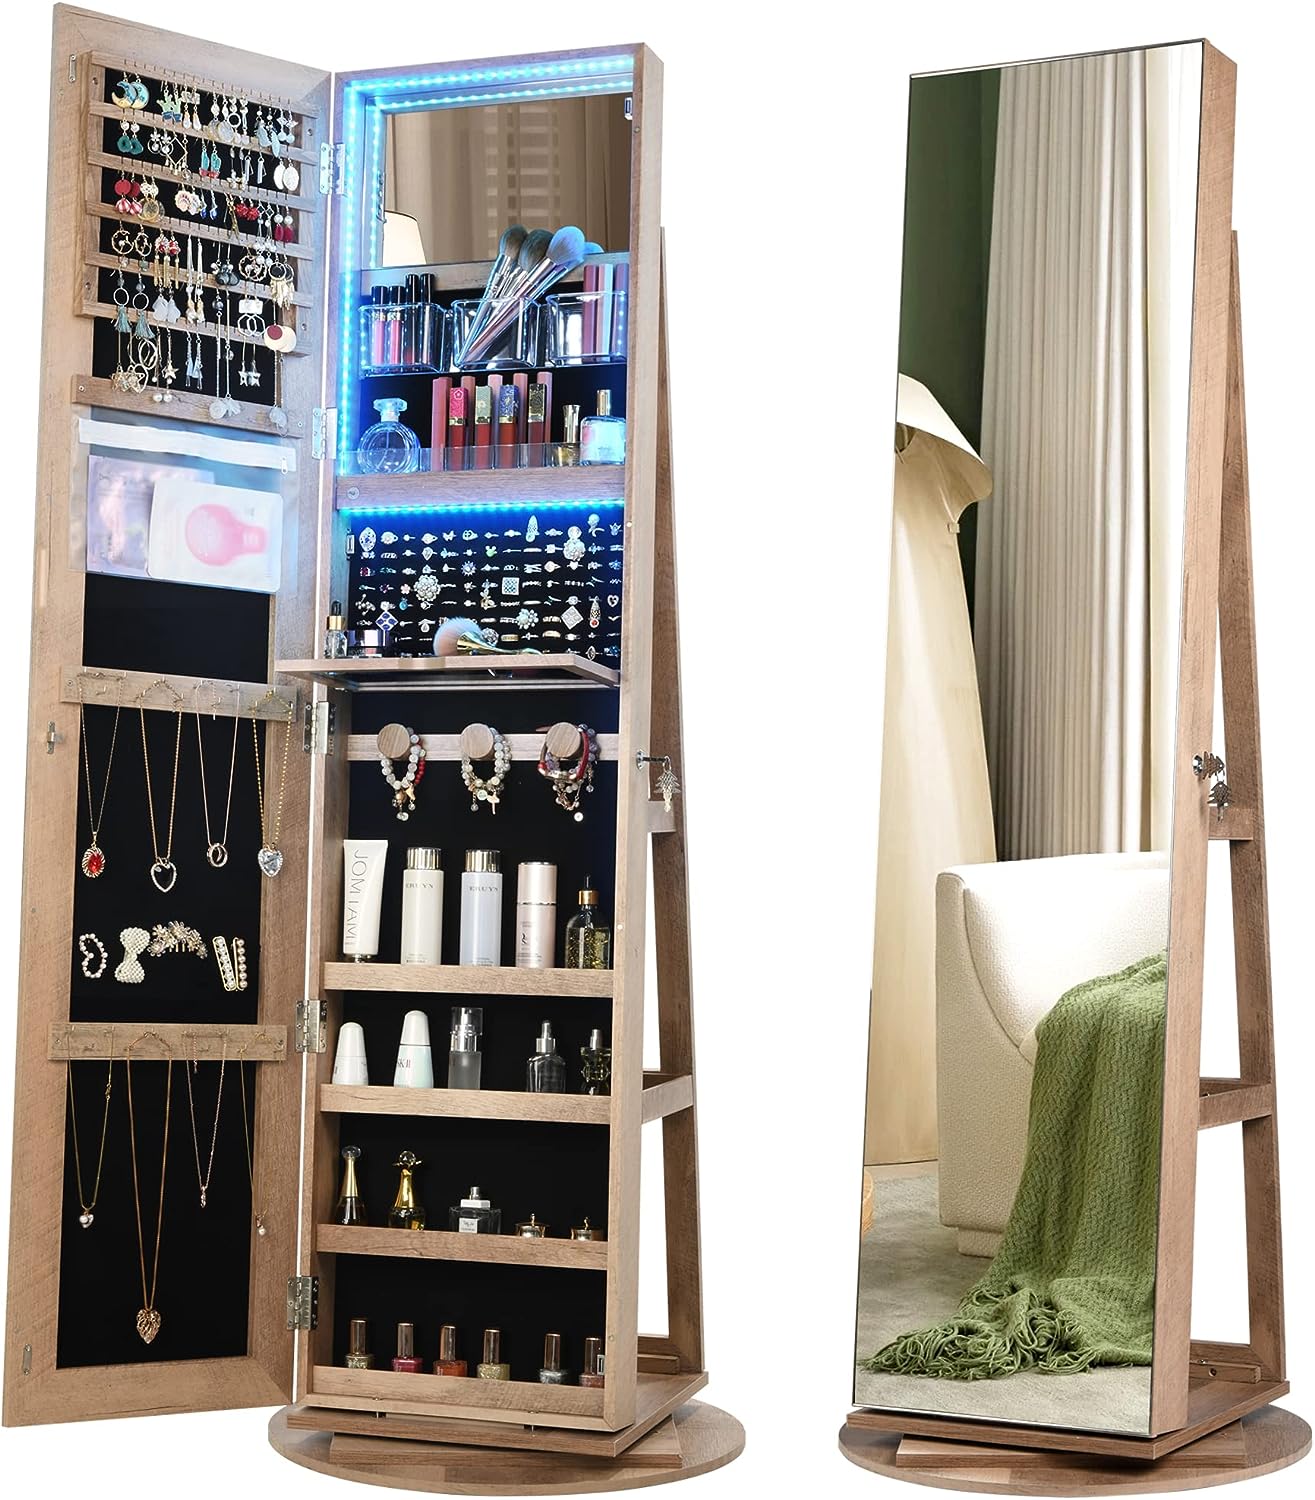 Vlsrka LED Light Jewelry Armoire with 360° Swivel Mirror, Large Lockable Organizer - $115